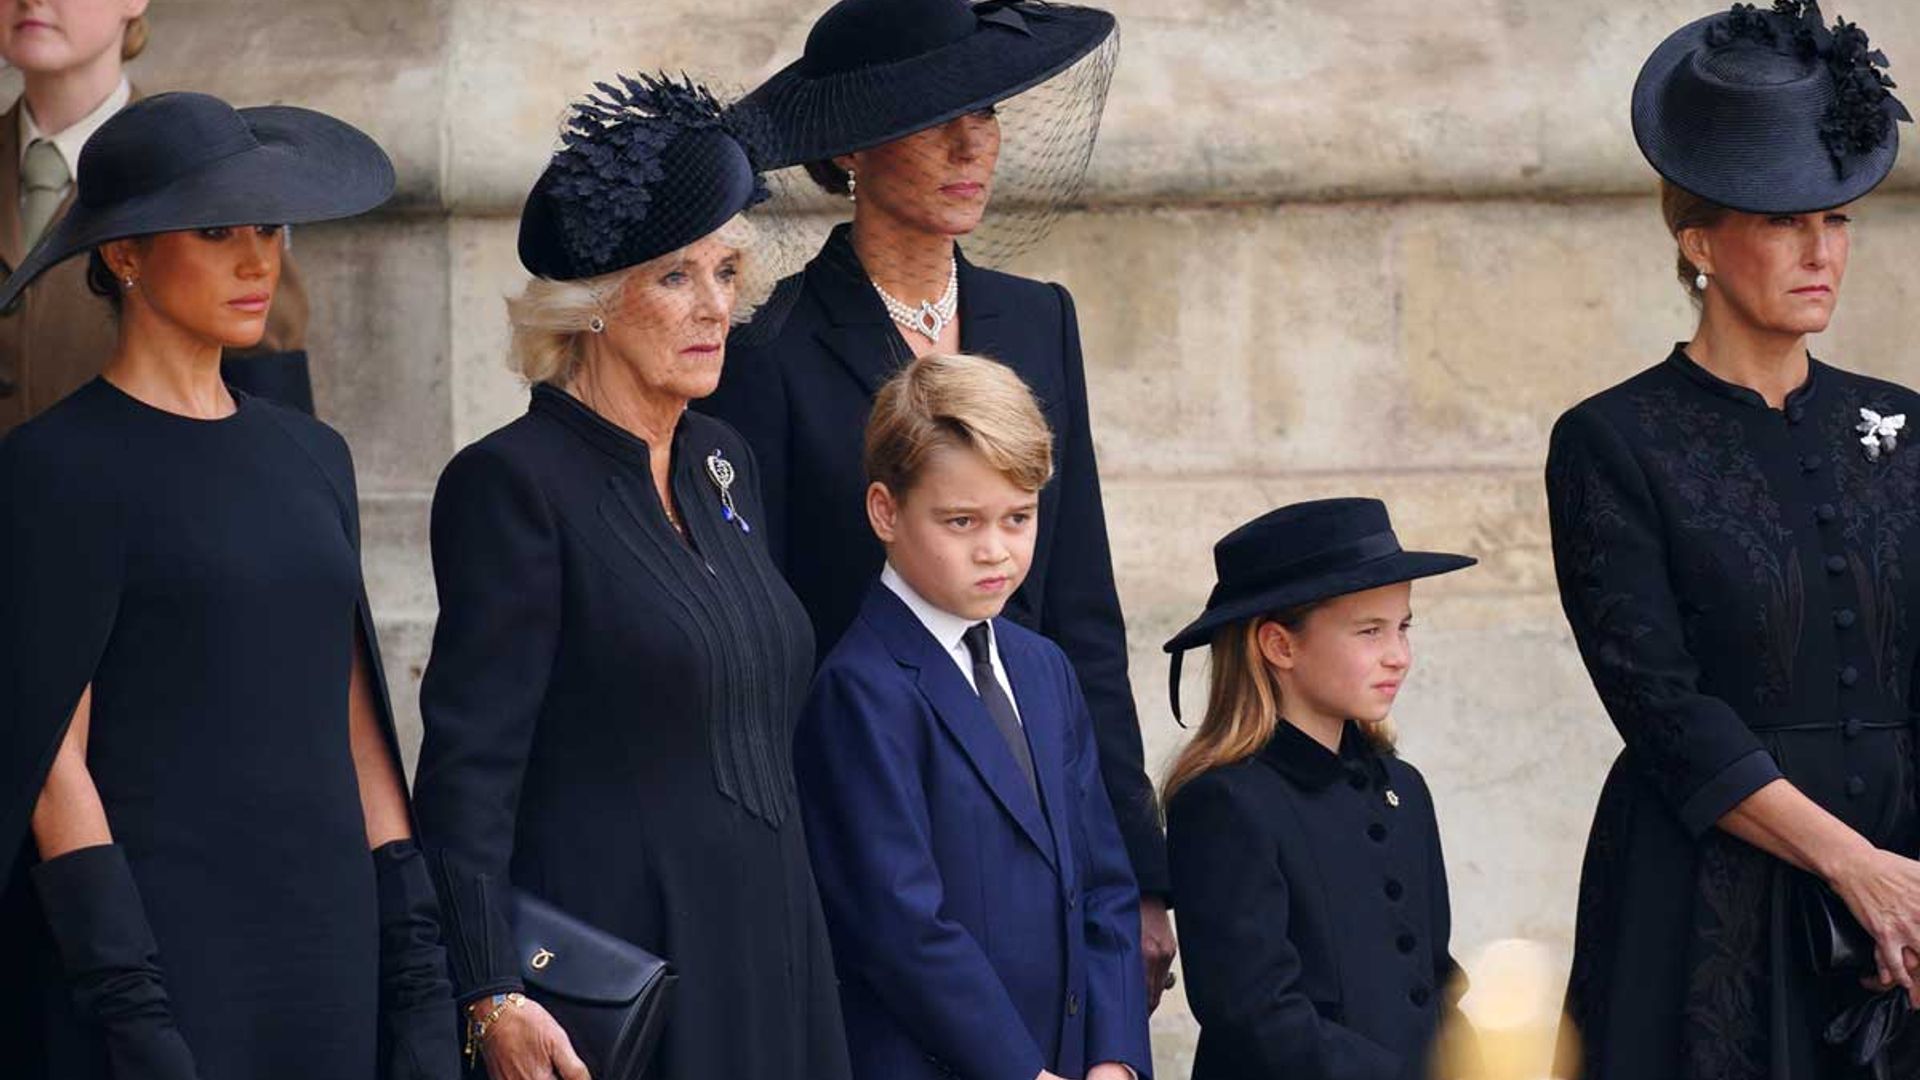 The moment Prince George and Princess Charlotte walk behind their great-grandmother's coffin - watch | HELLO!